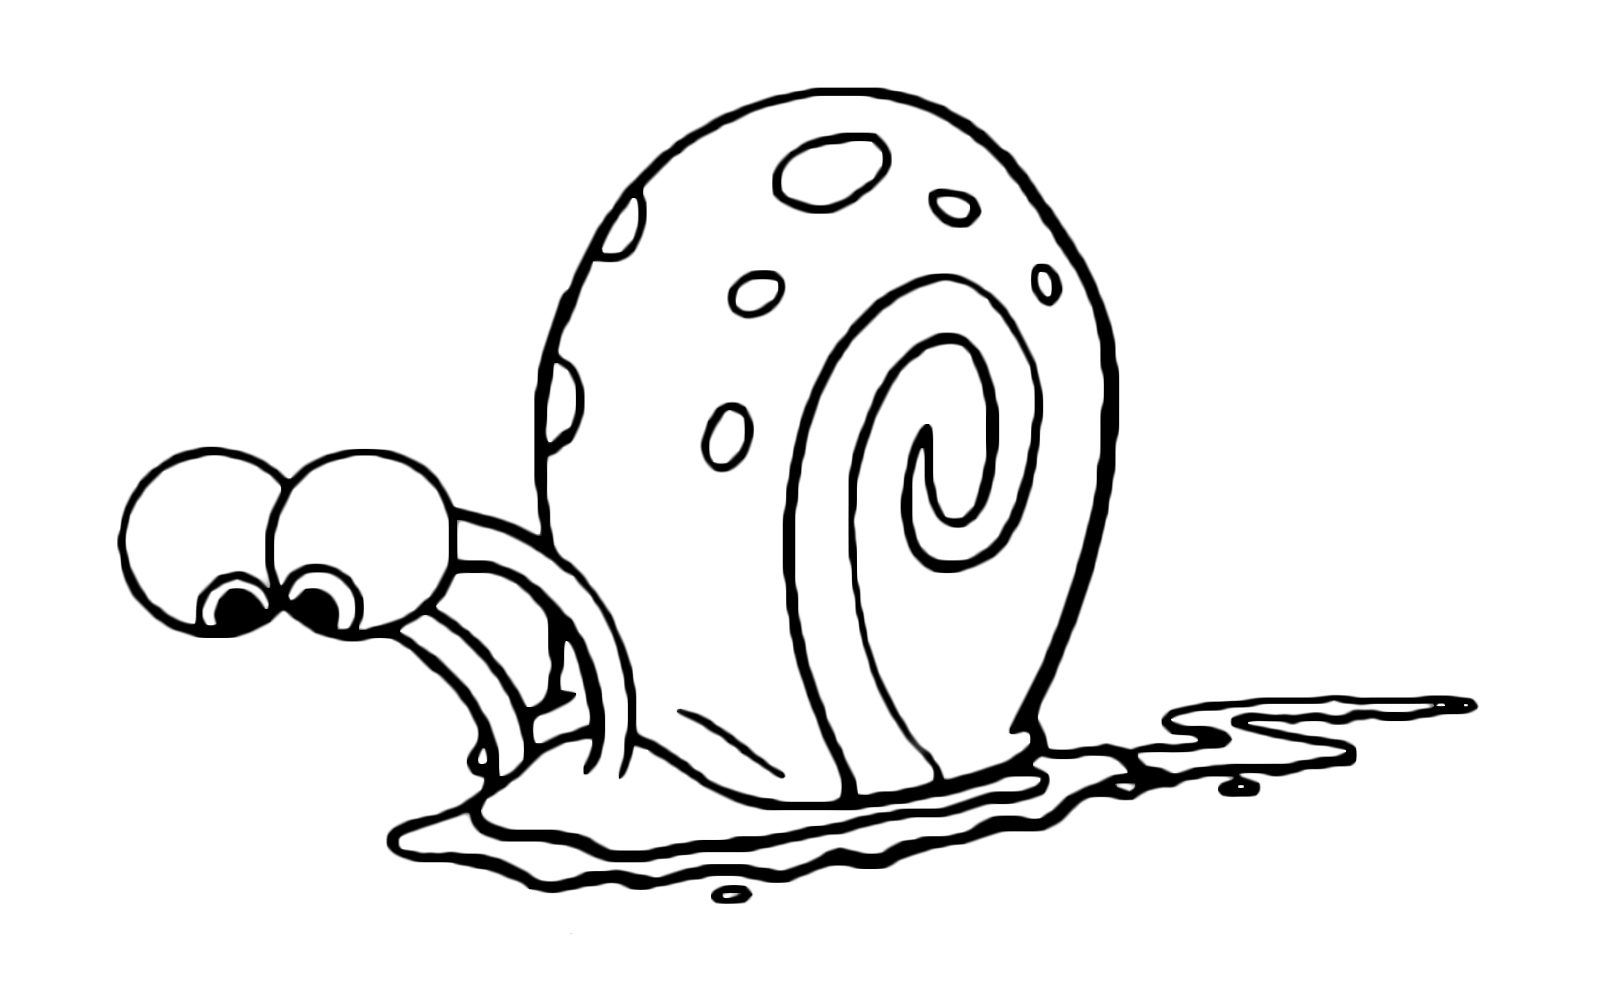 SpongeBob - Gary the snail looks at the ground puzzled